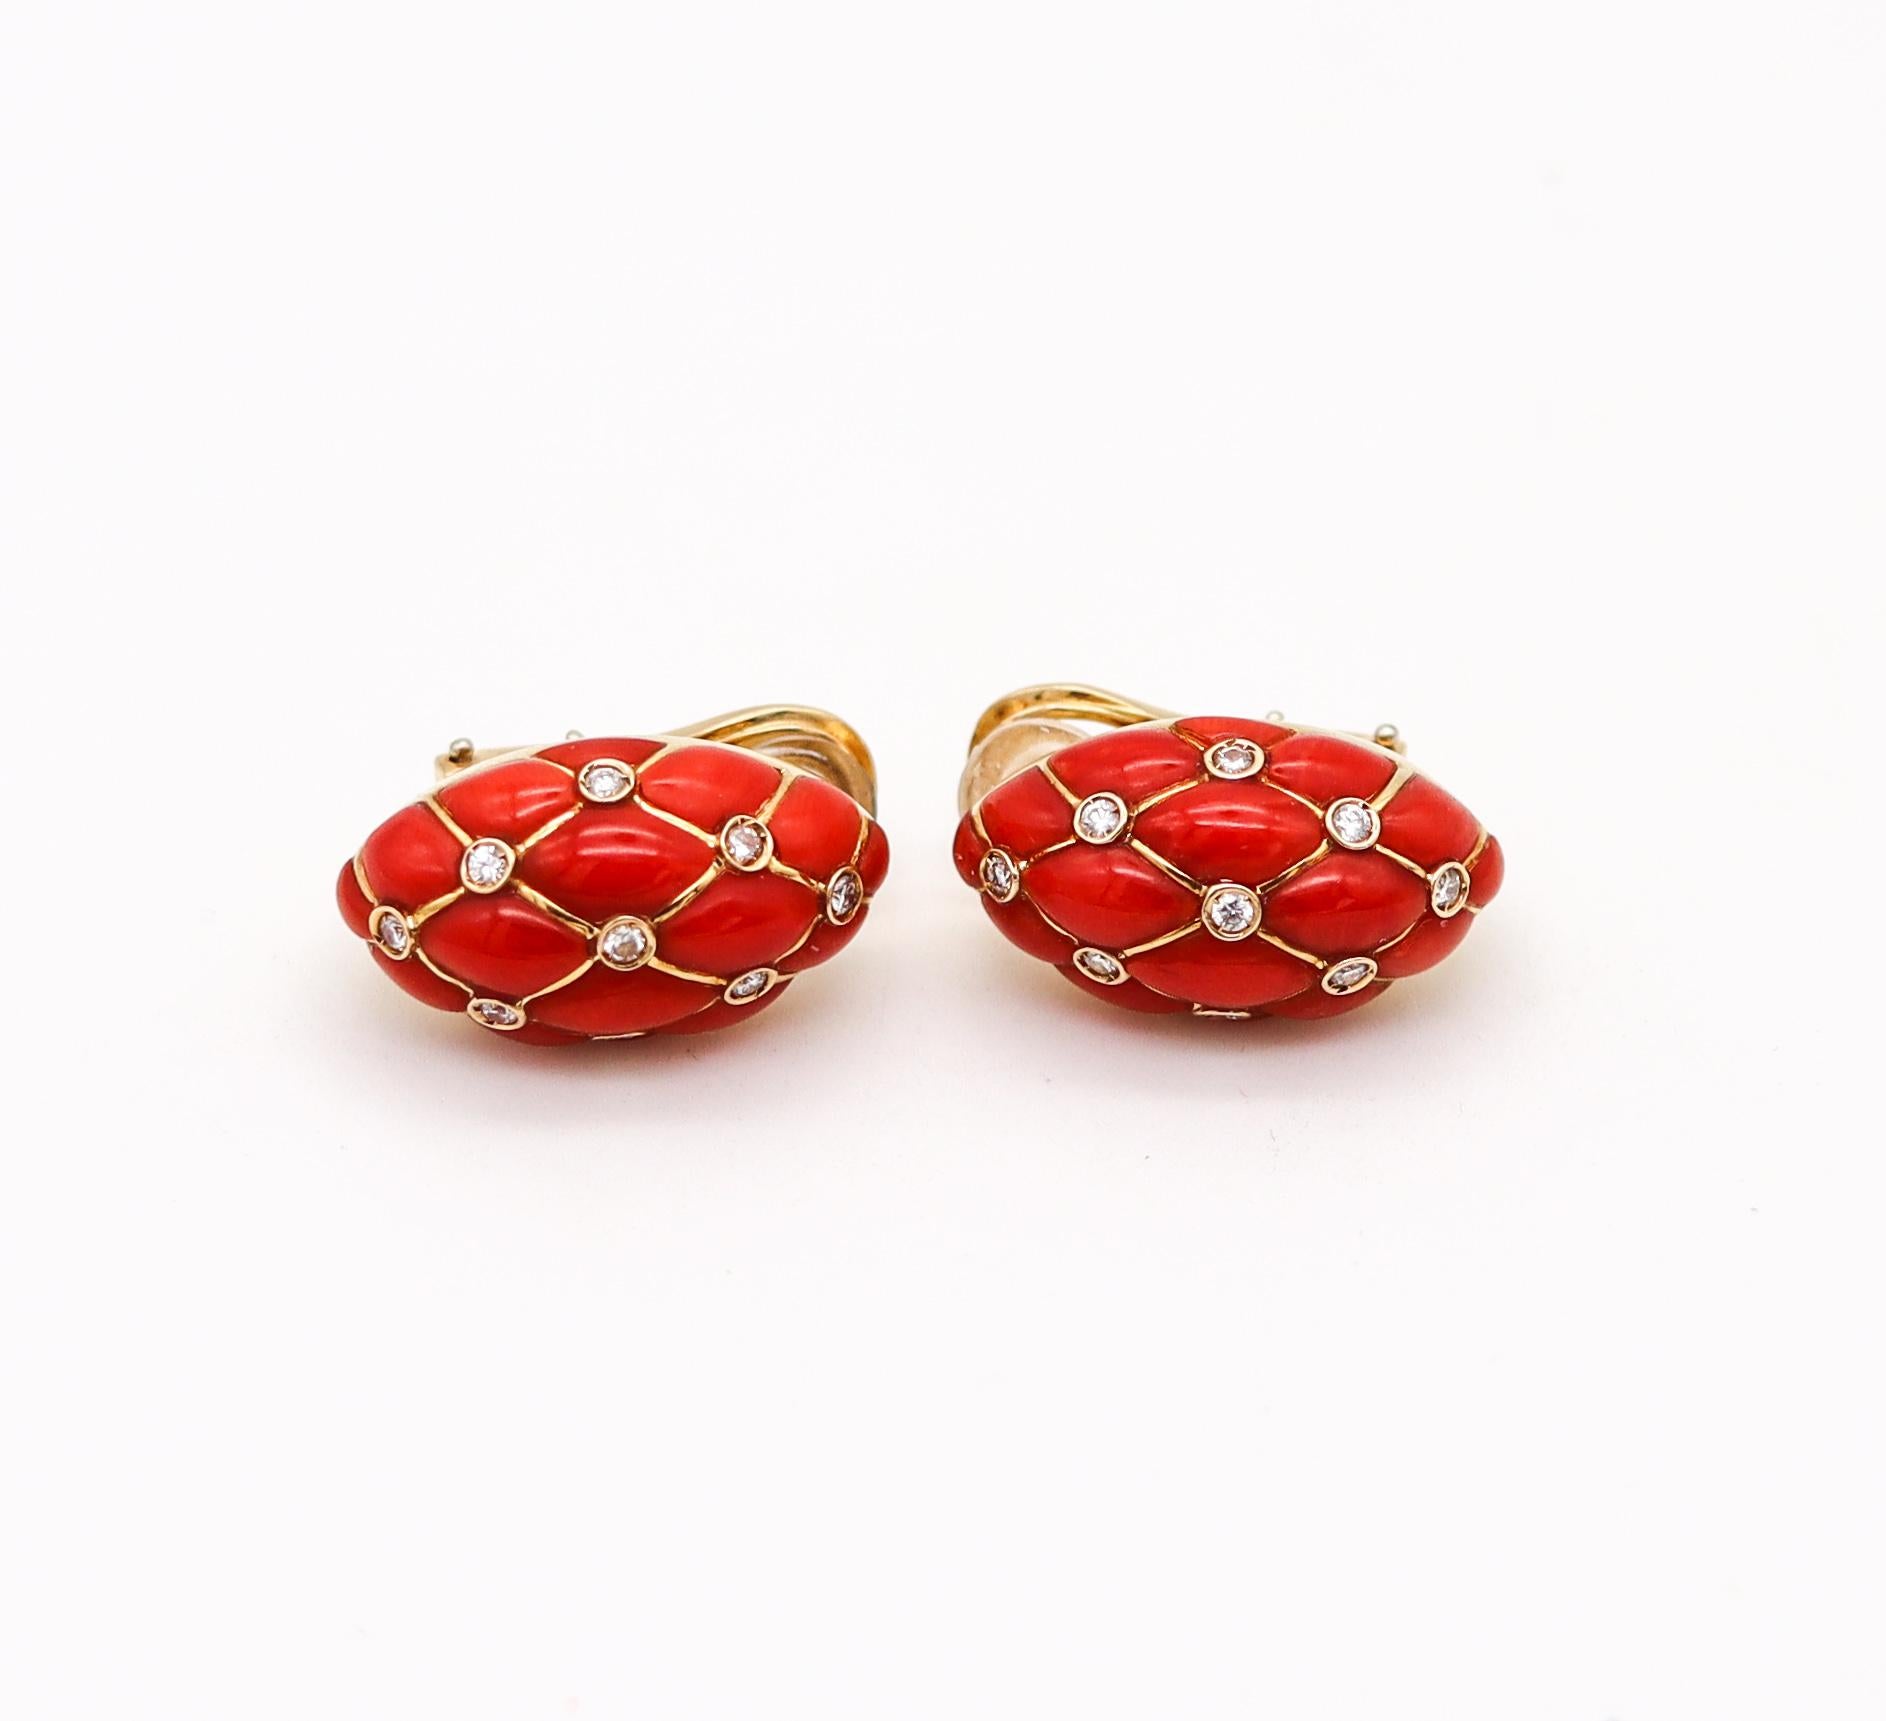 Neapolitan coral and diamonds earrings.

Beautiful and colorful contemporary pieces, crafted in the portuary city of Napoles, Italy in solid yellow gold of 18 karats with high polished finish. These convertible earrings has been designed with a